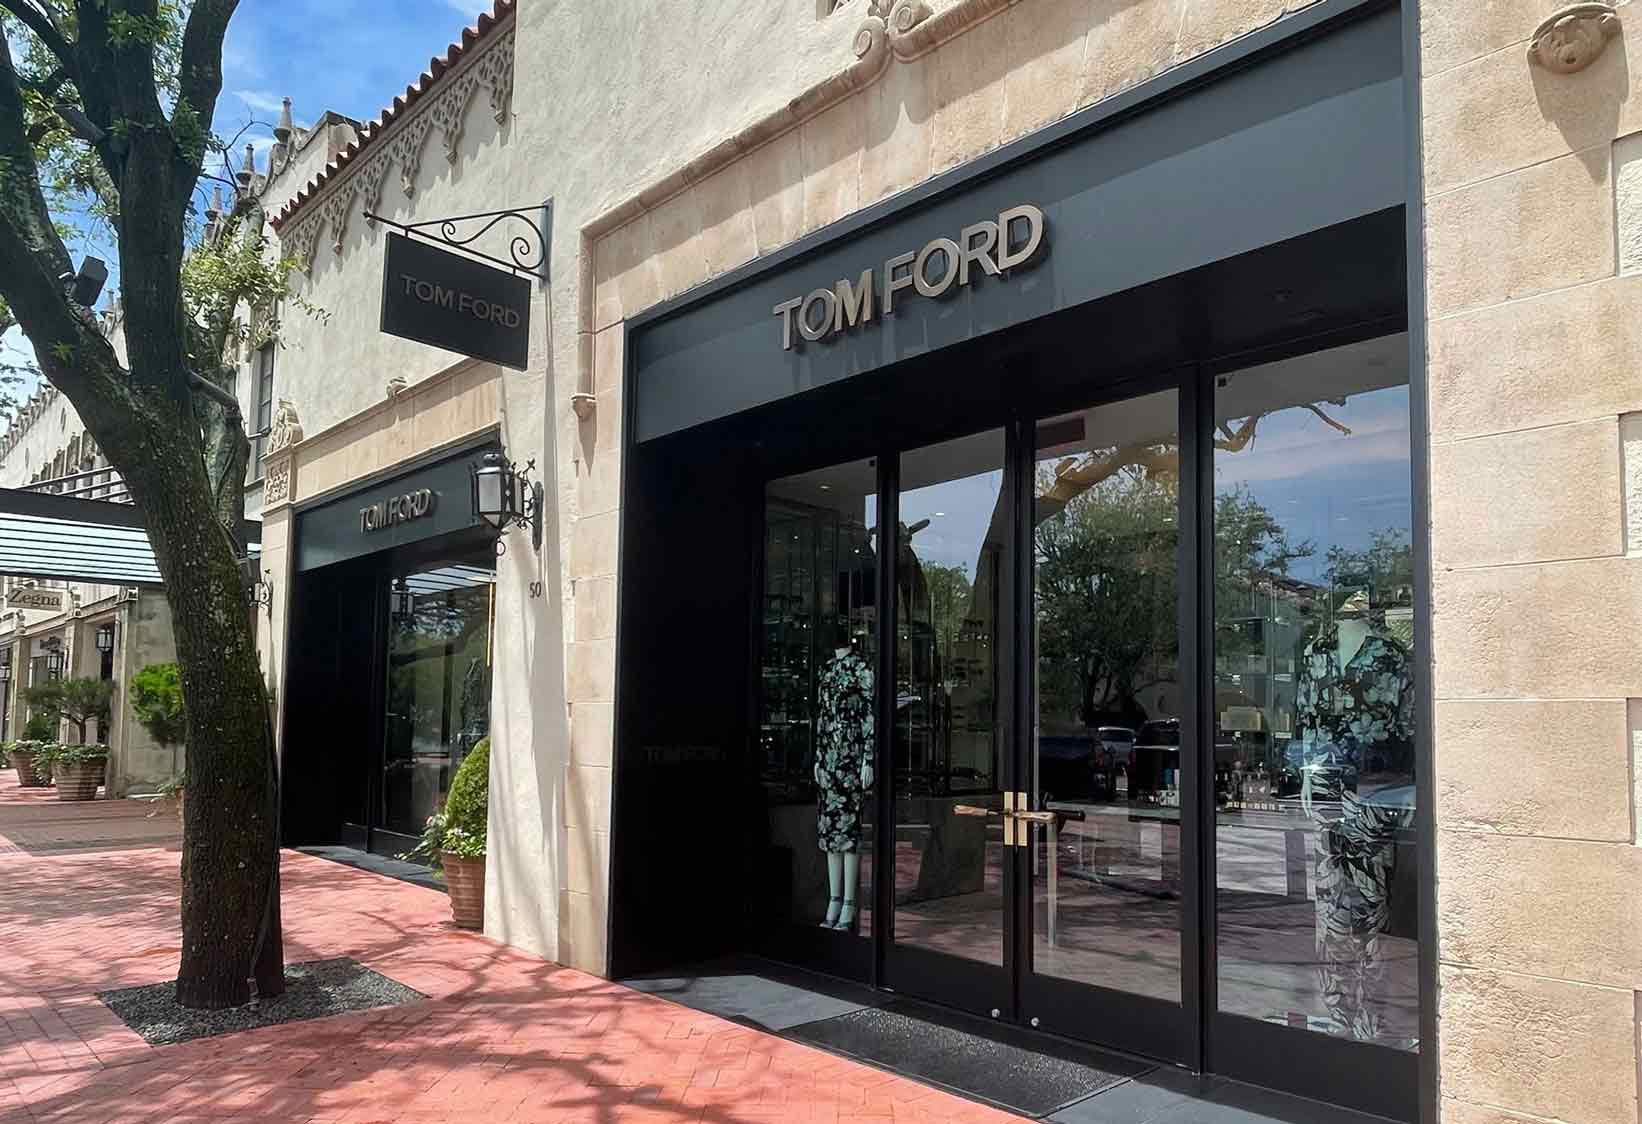 Tom Ford store front in Highland Park Village